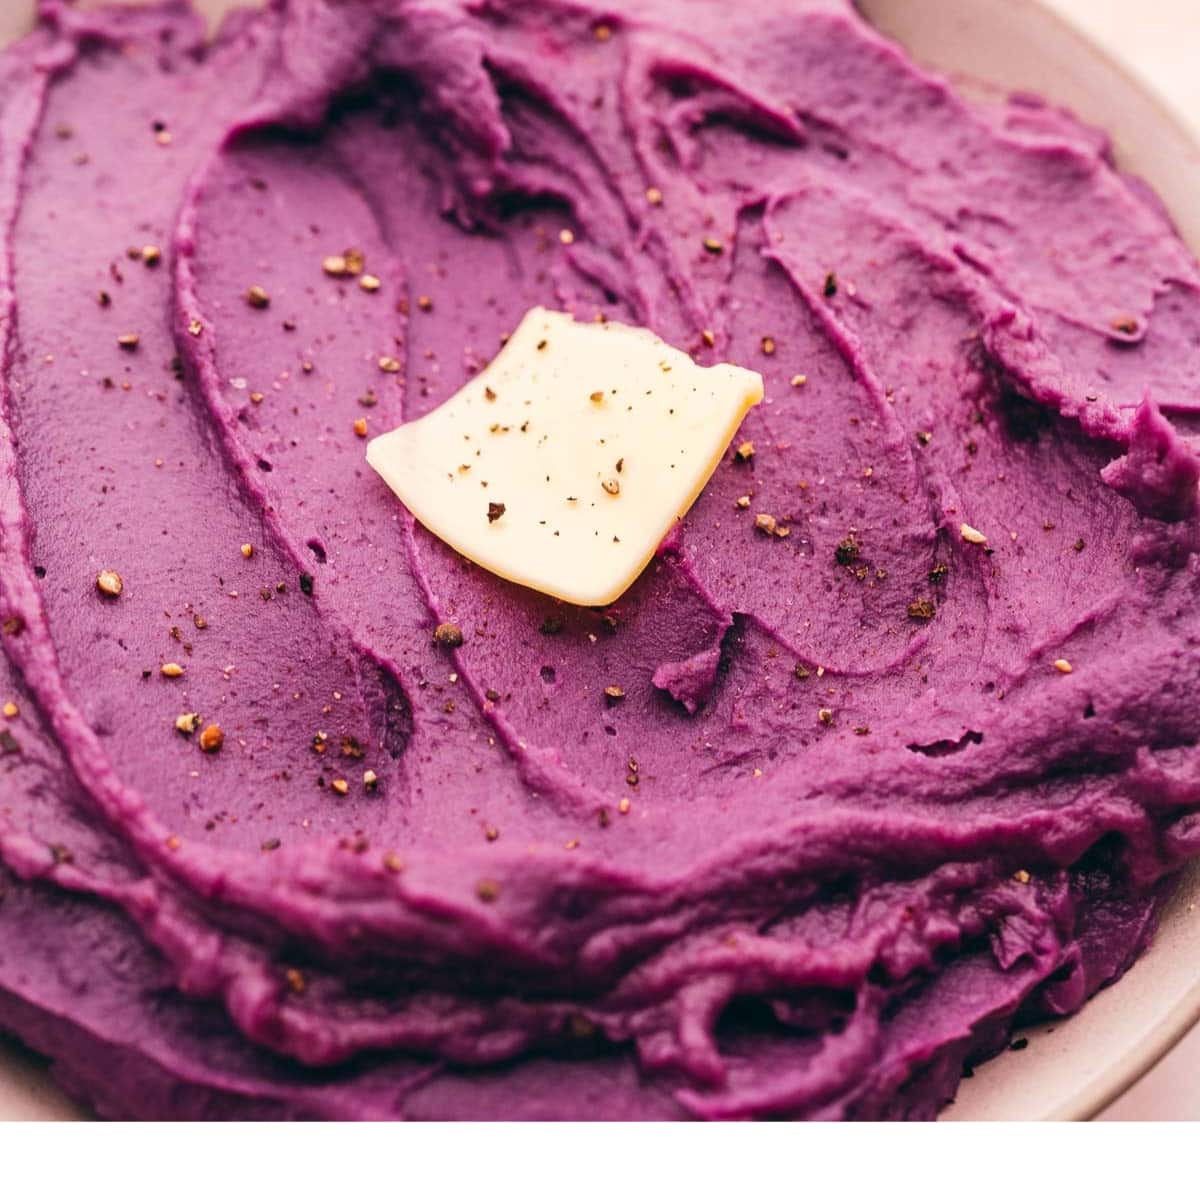 A bowl of purple mashed potatoes with a butter on top made from mashed purple sweet potatoes.